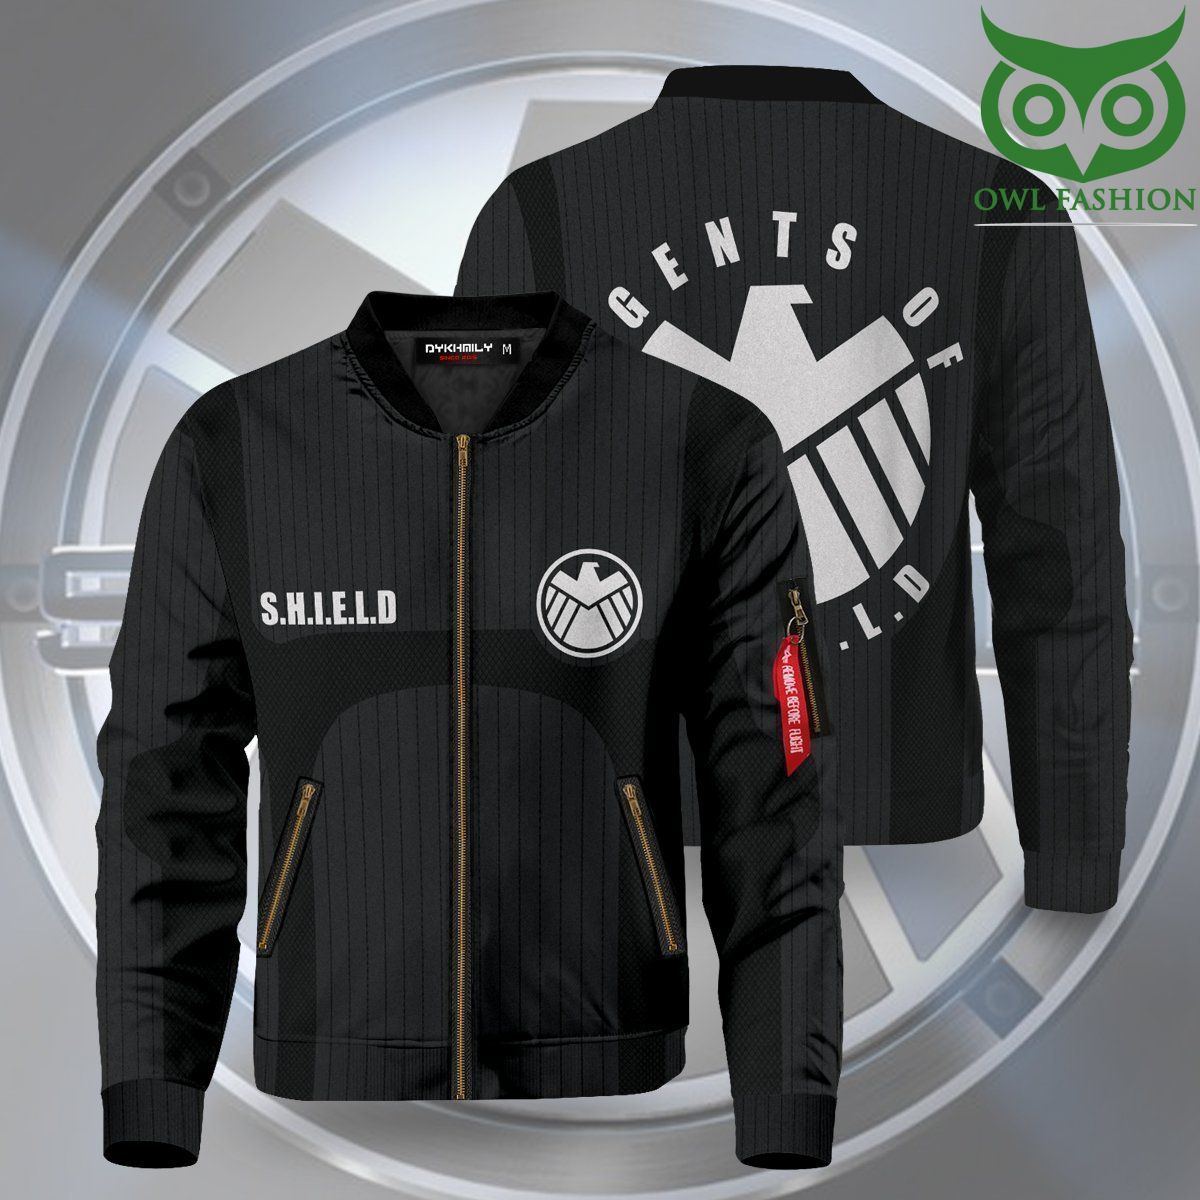 444 Agents of SHIELD Printed Bomber Jacket